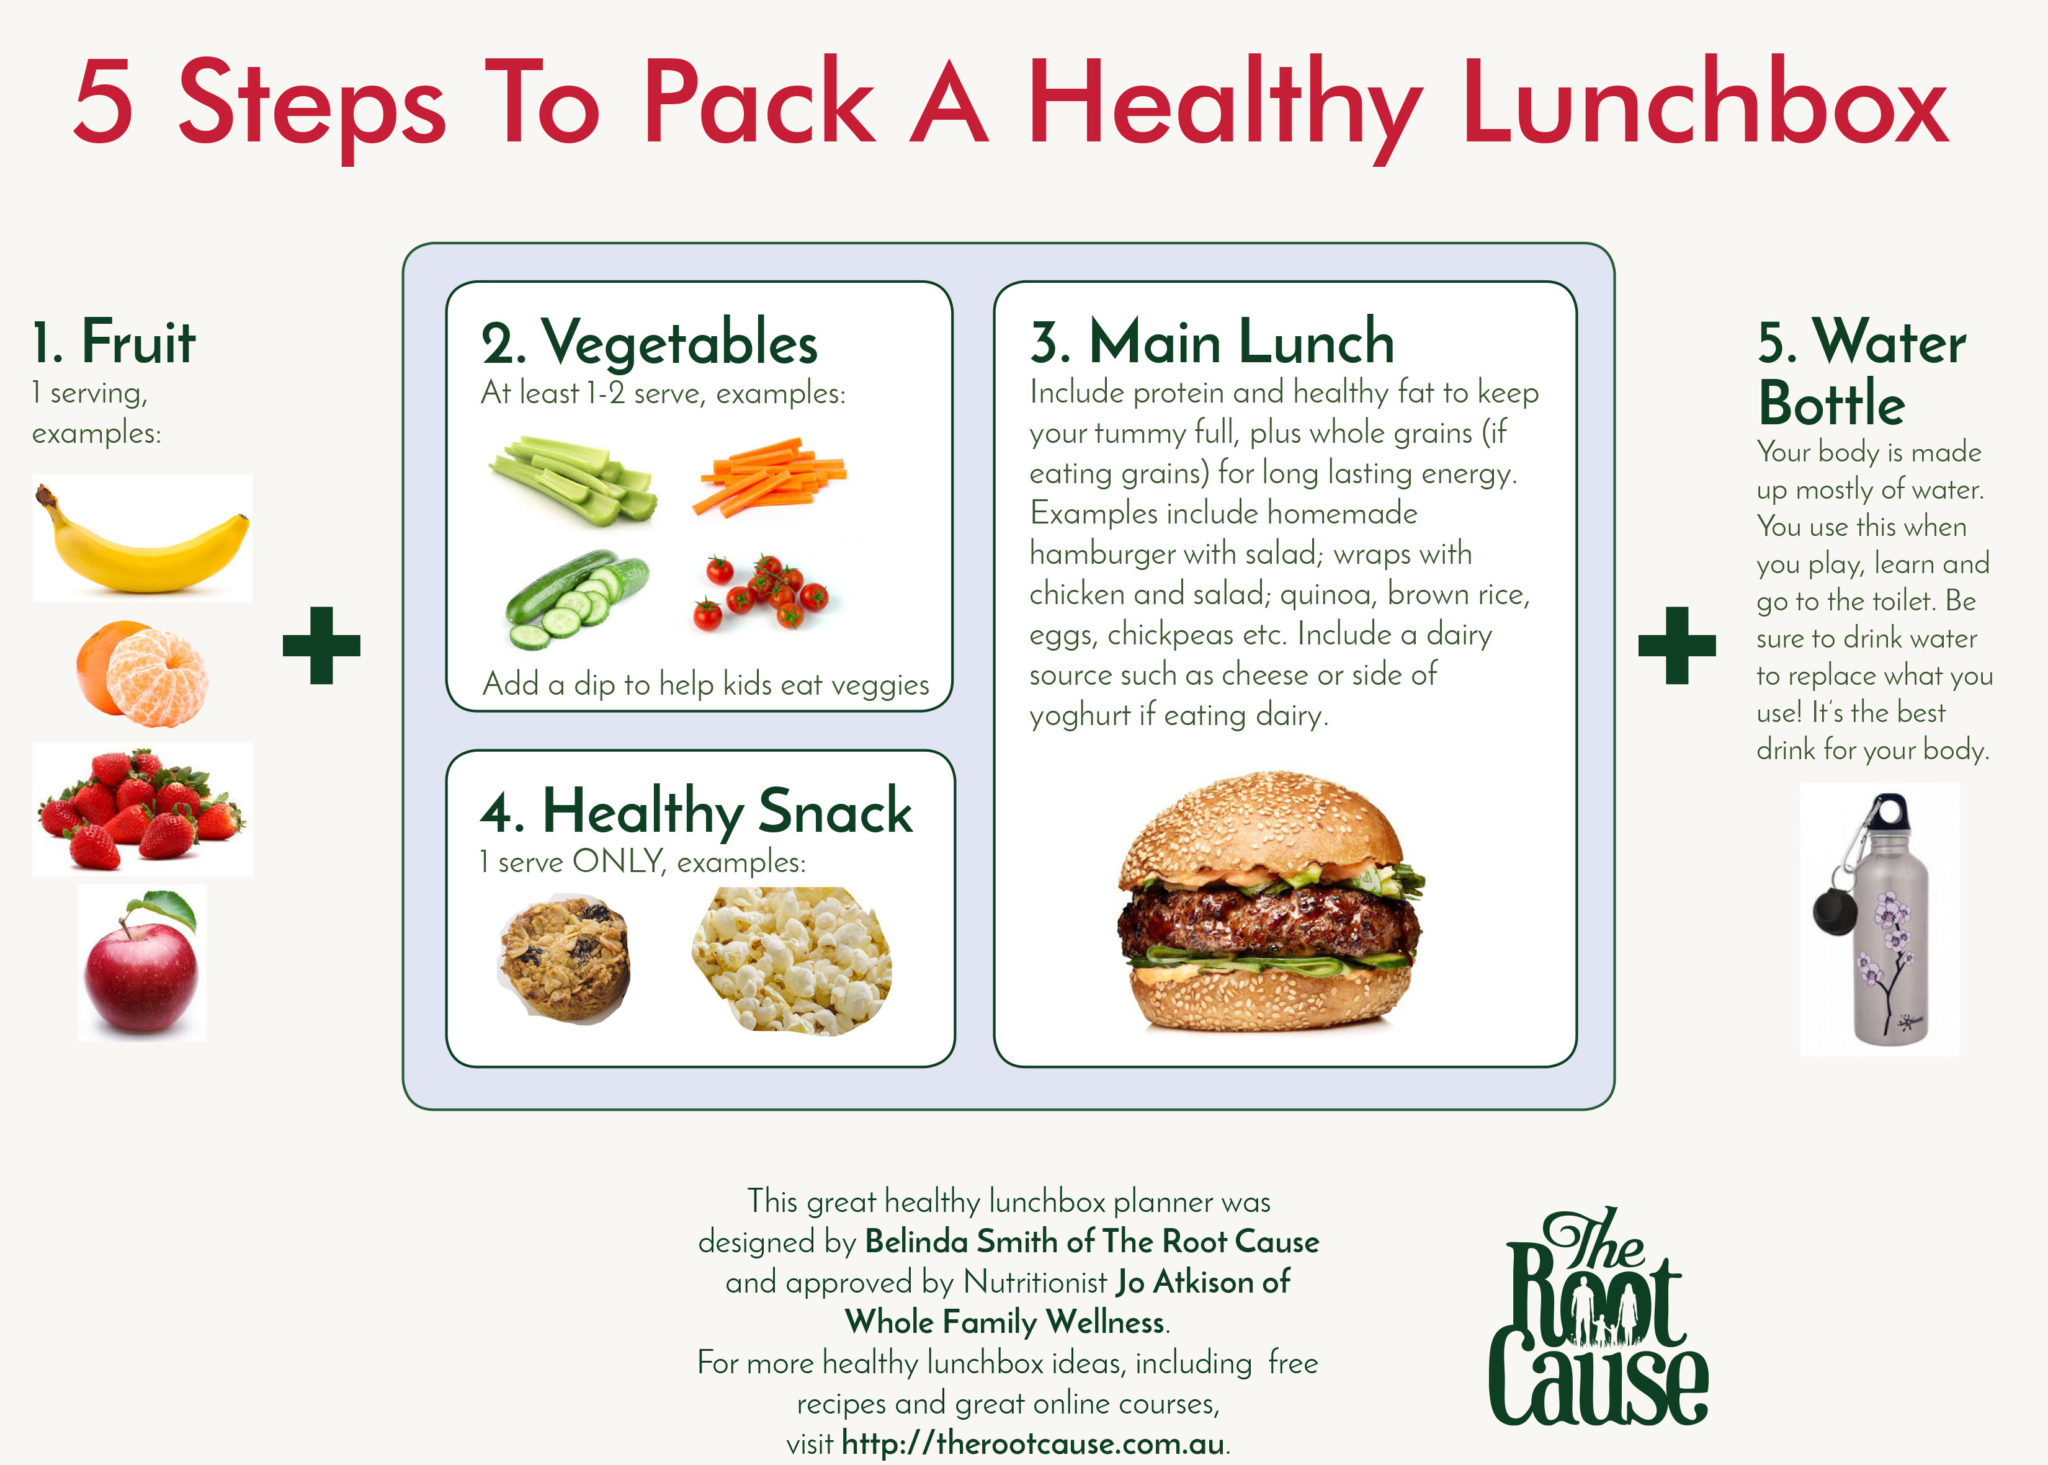 5 Mistakes Parents Make Packing Lunch for Kids